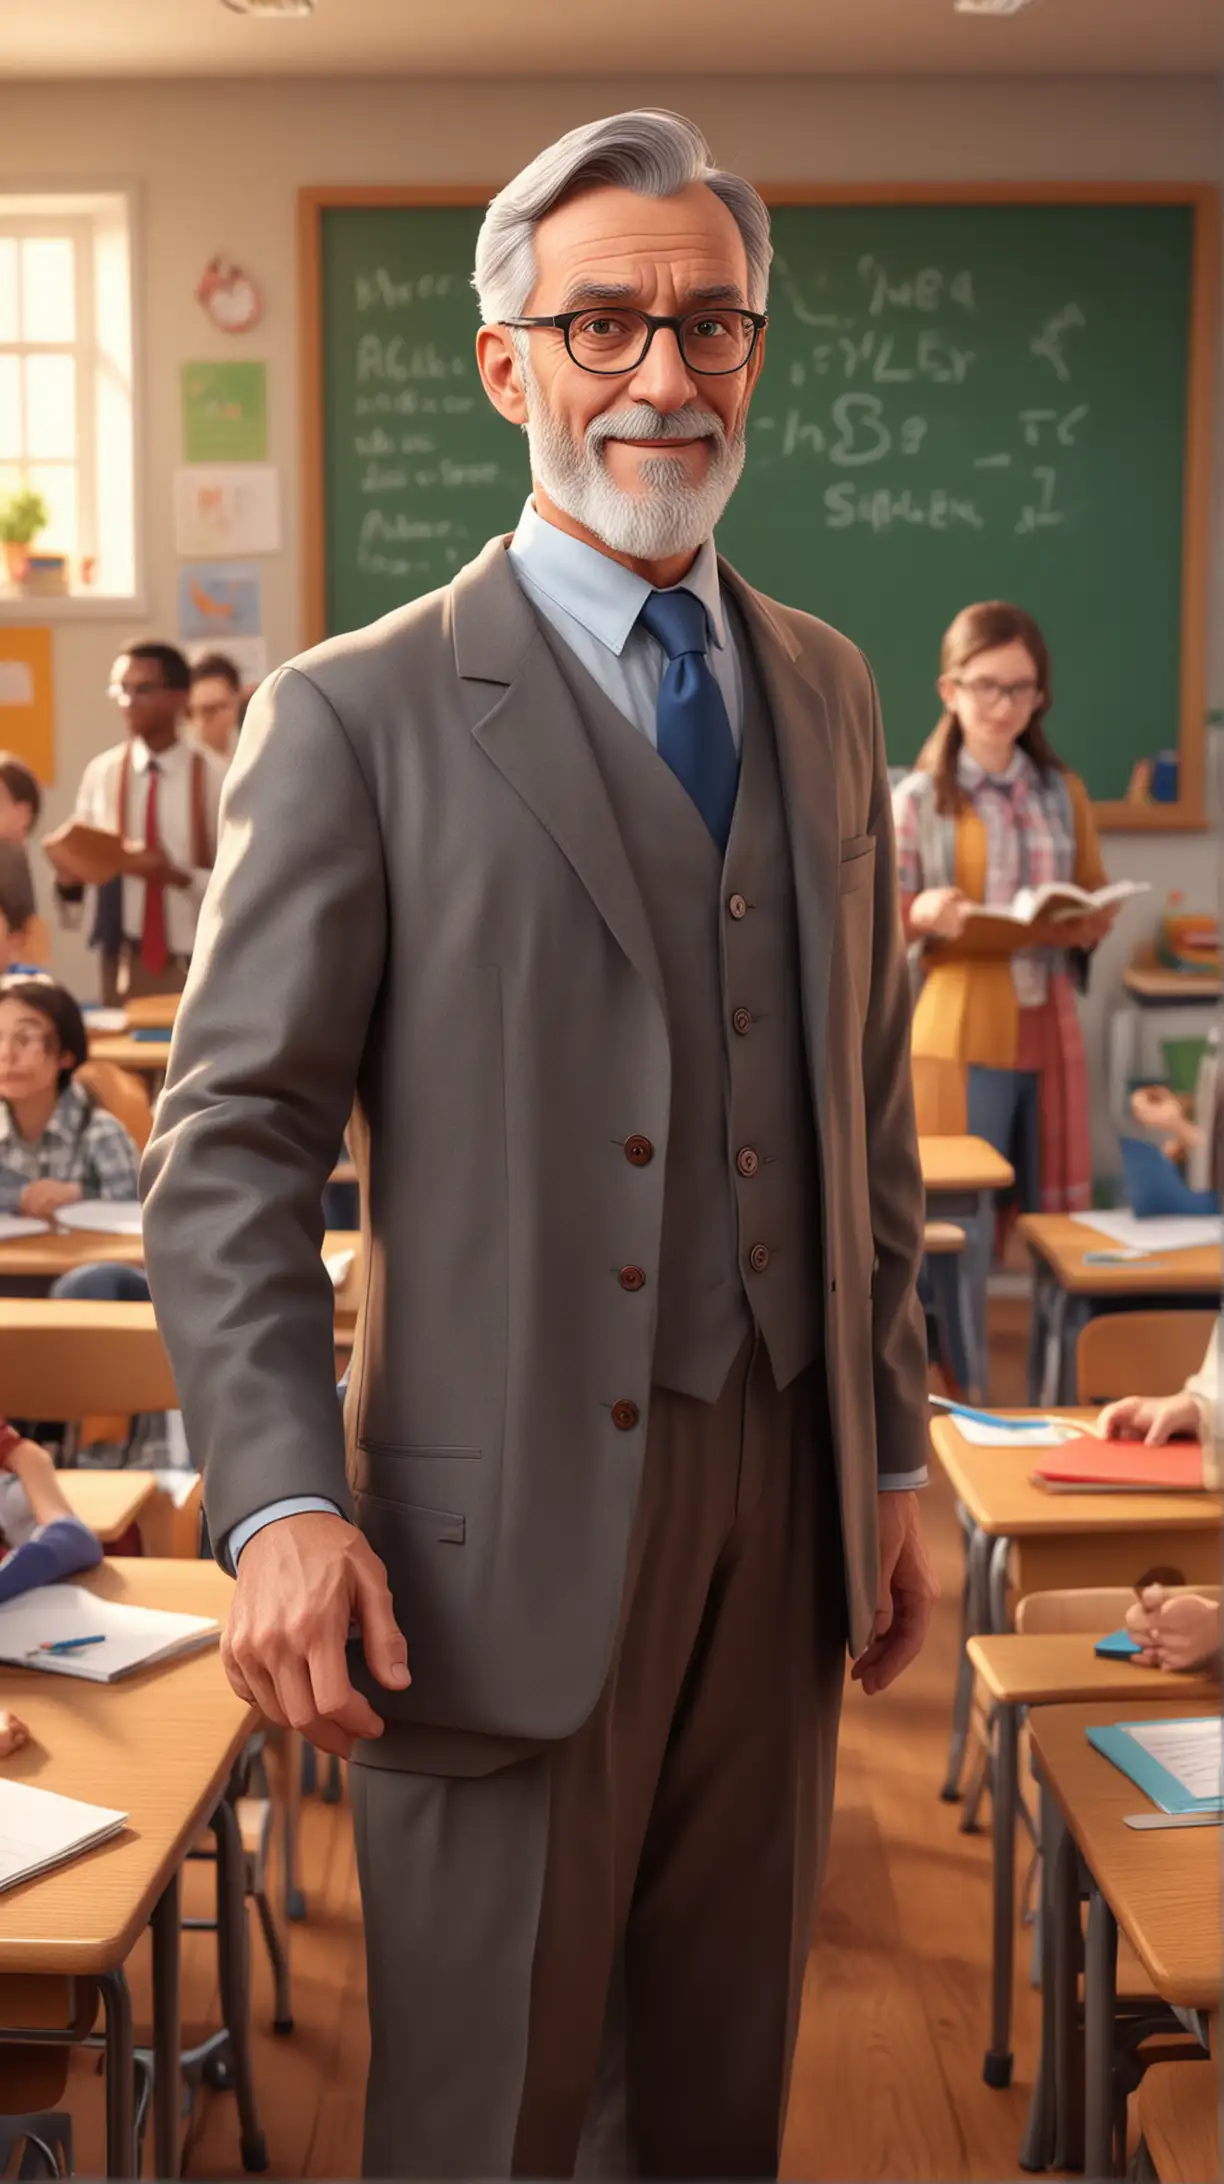 Create a 3D illustrator of an animated scene where a middle aged good looking professor is standing in front of the students in a classroom. Beautiful colourful and spirited background illustrations.